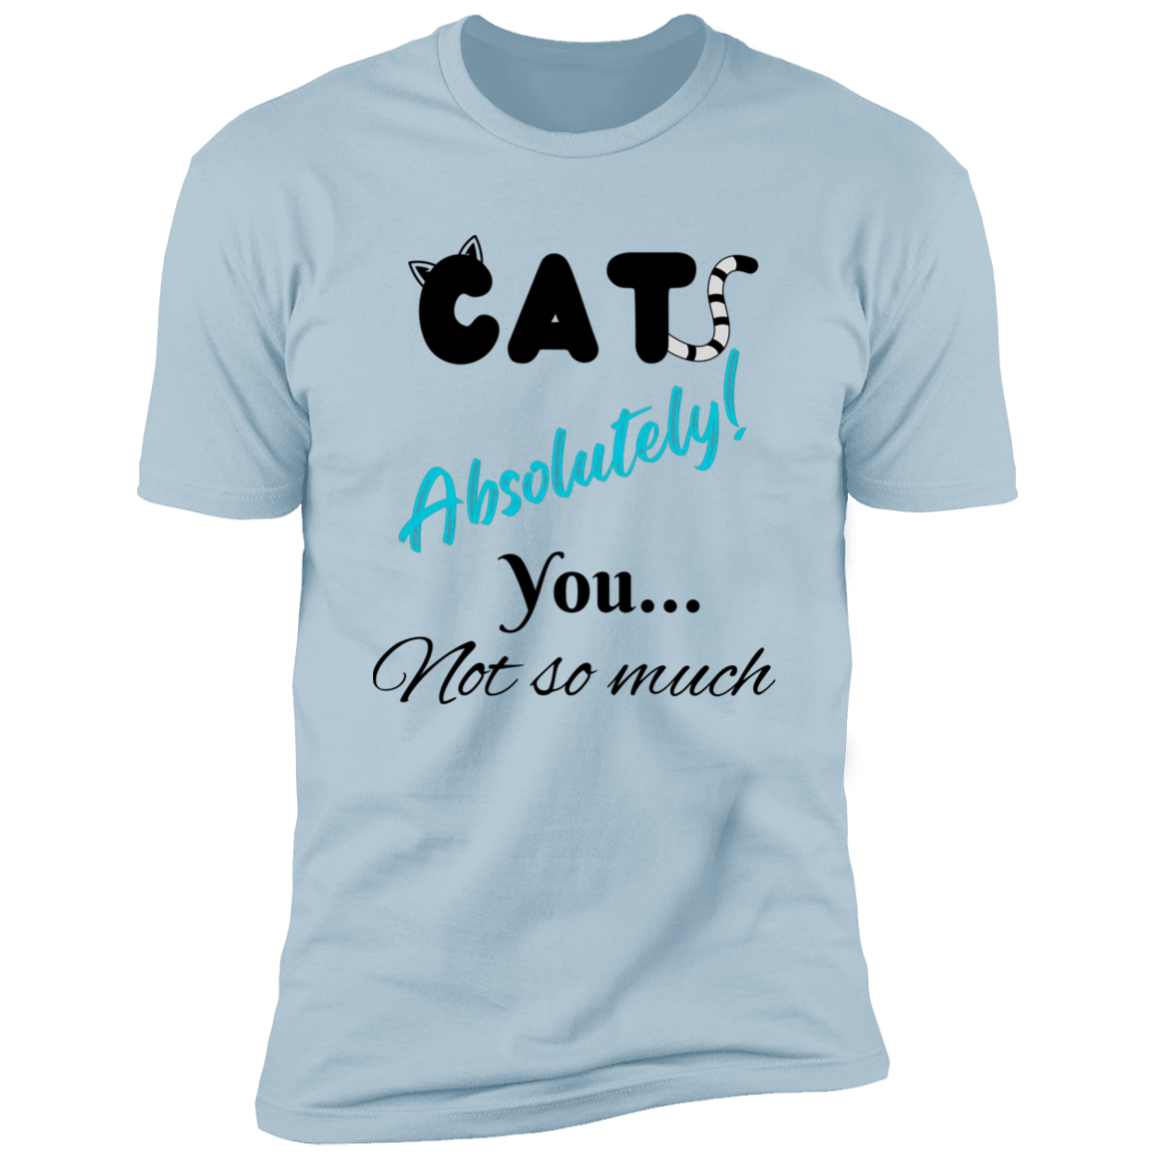 Cats Absolutely You Not So Much T-shirt, Cat Shirt for humans , in light blue